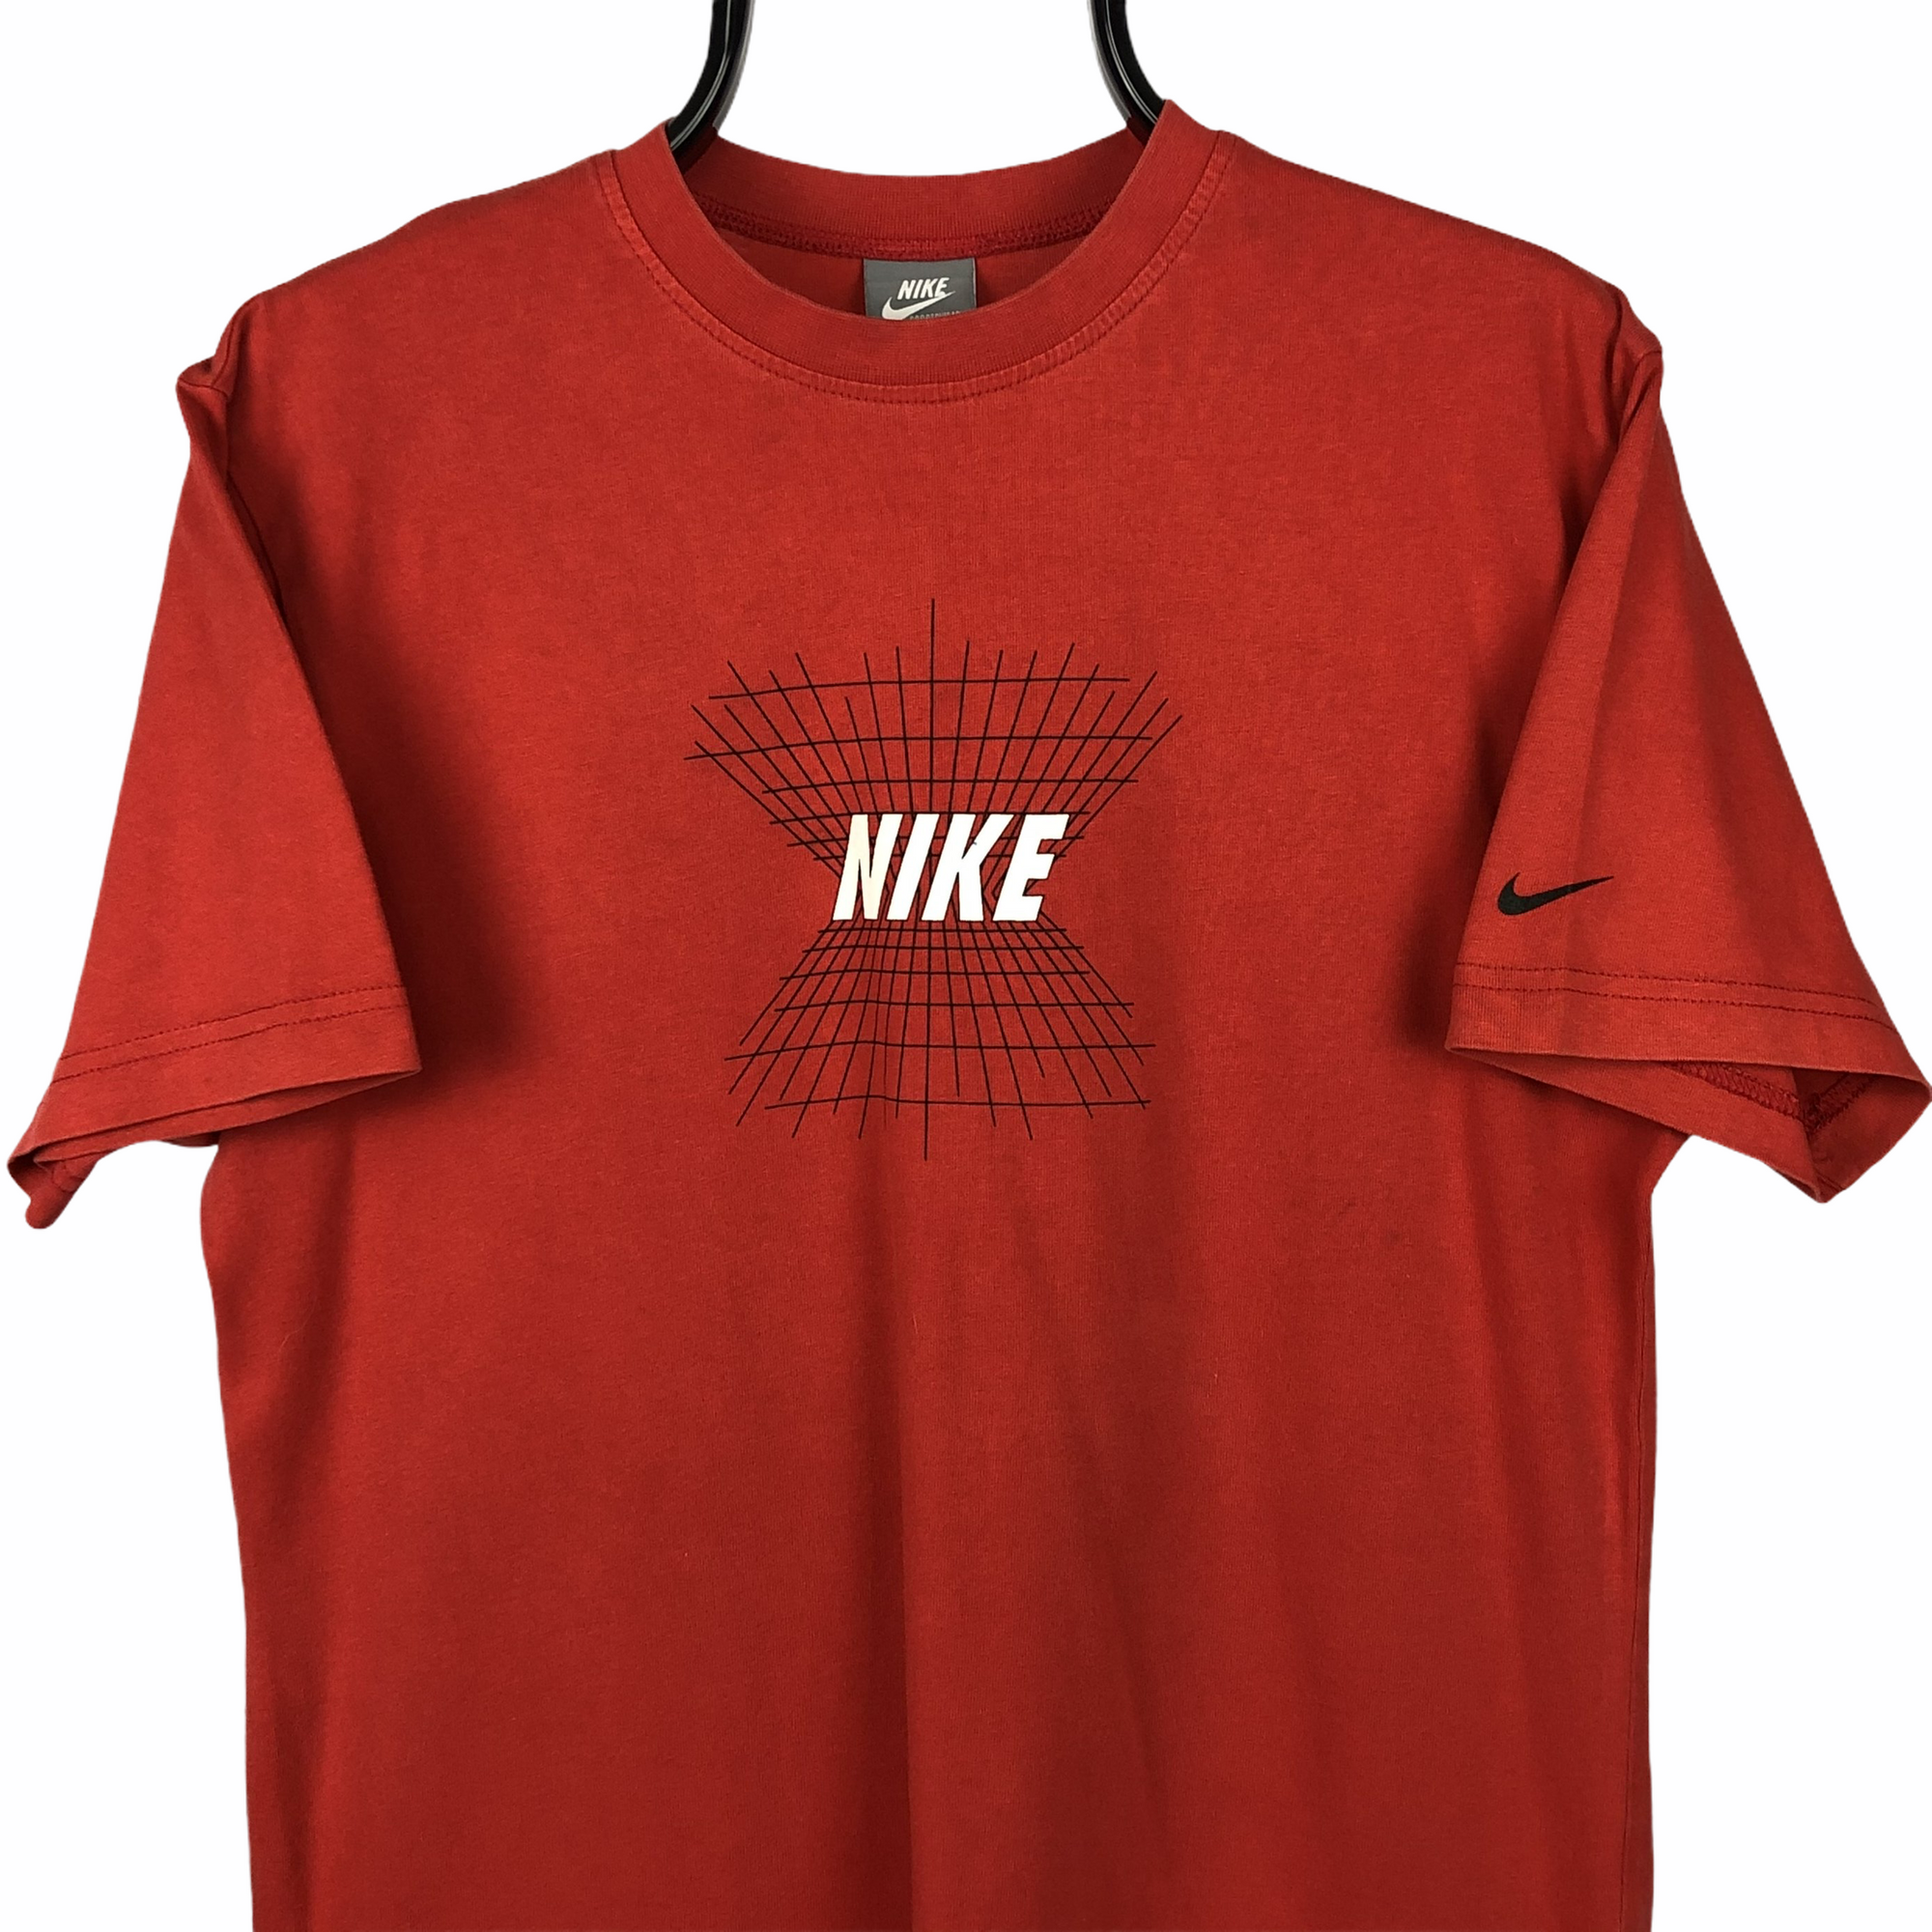 Vintage Nike Spellout Tee in Red - Men's Small/Women's Medium